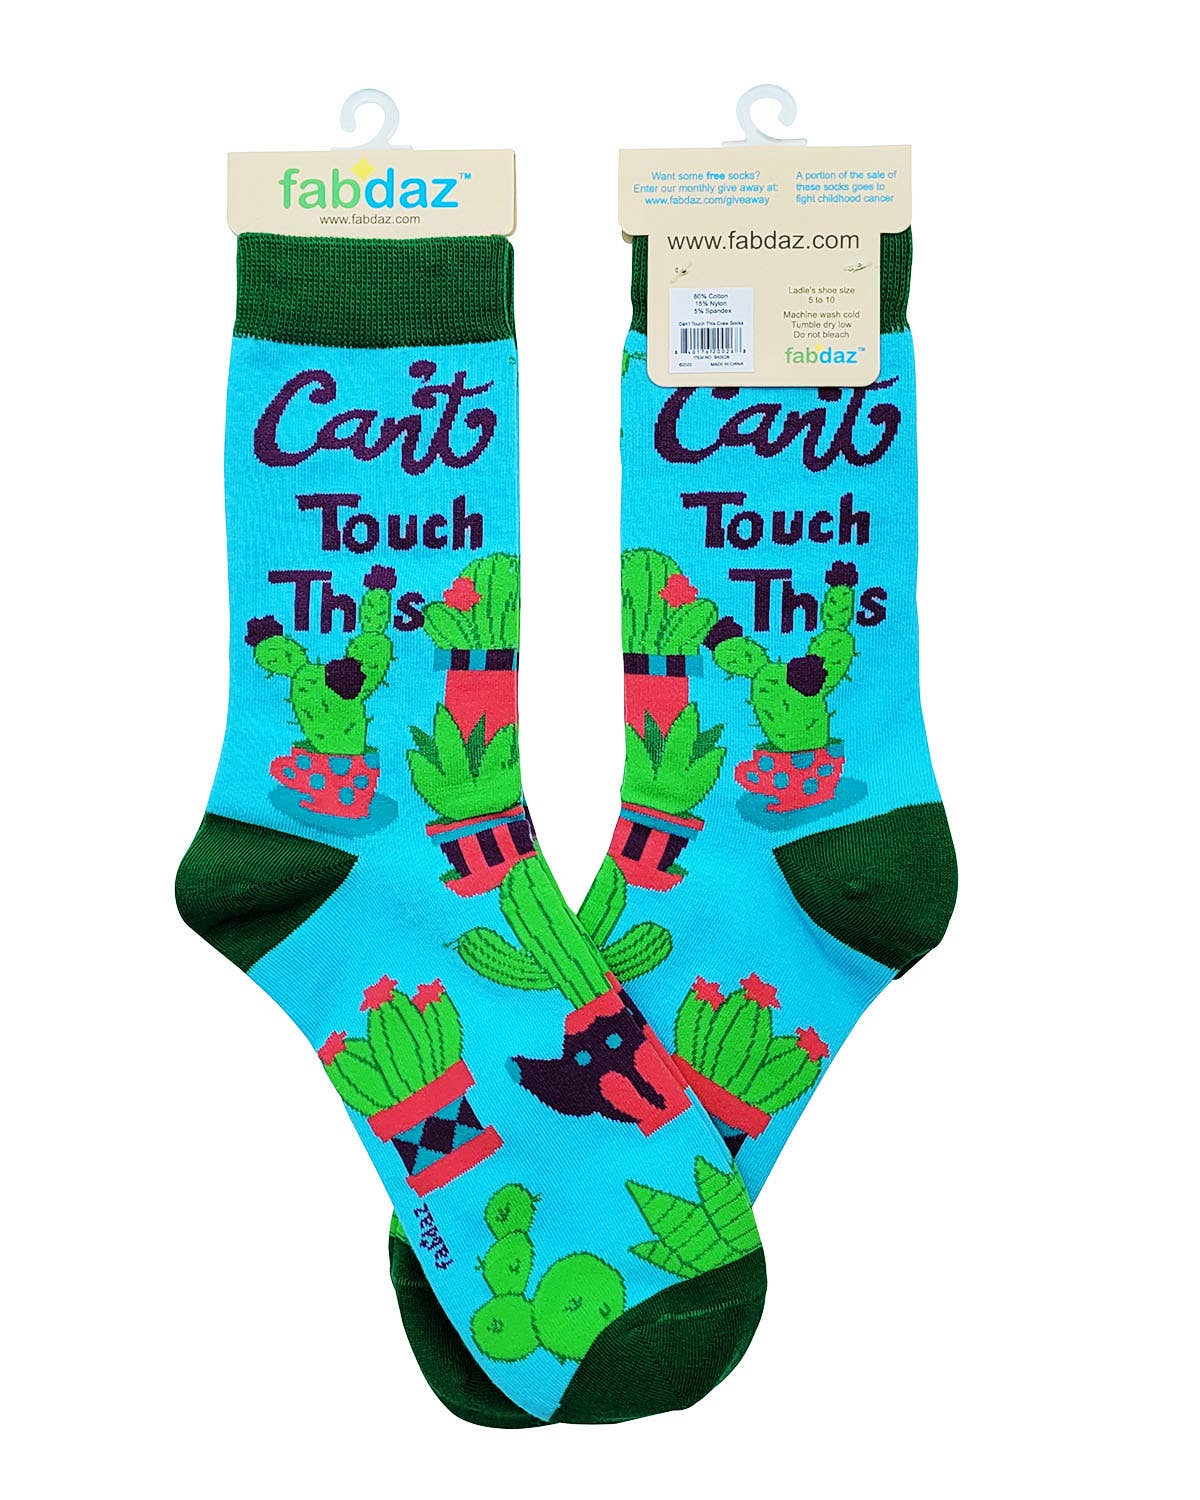 Can't Touch This Women's Crew Socks Featuring Prickly Cactus